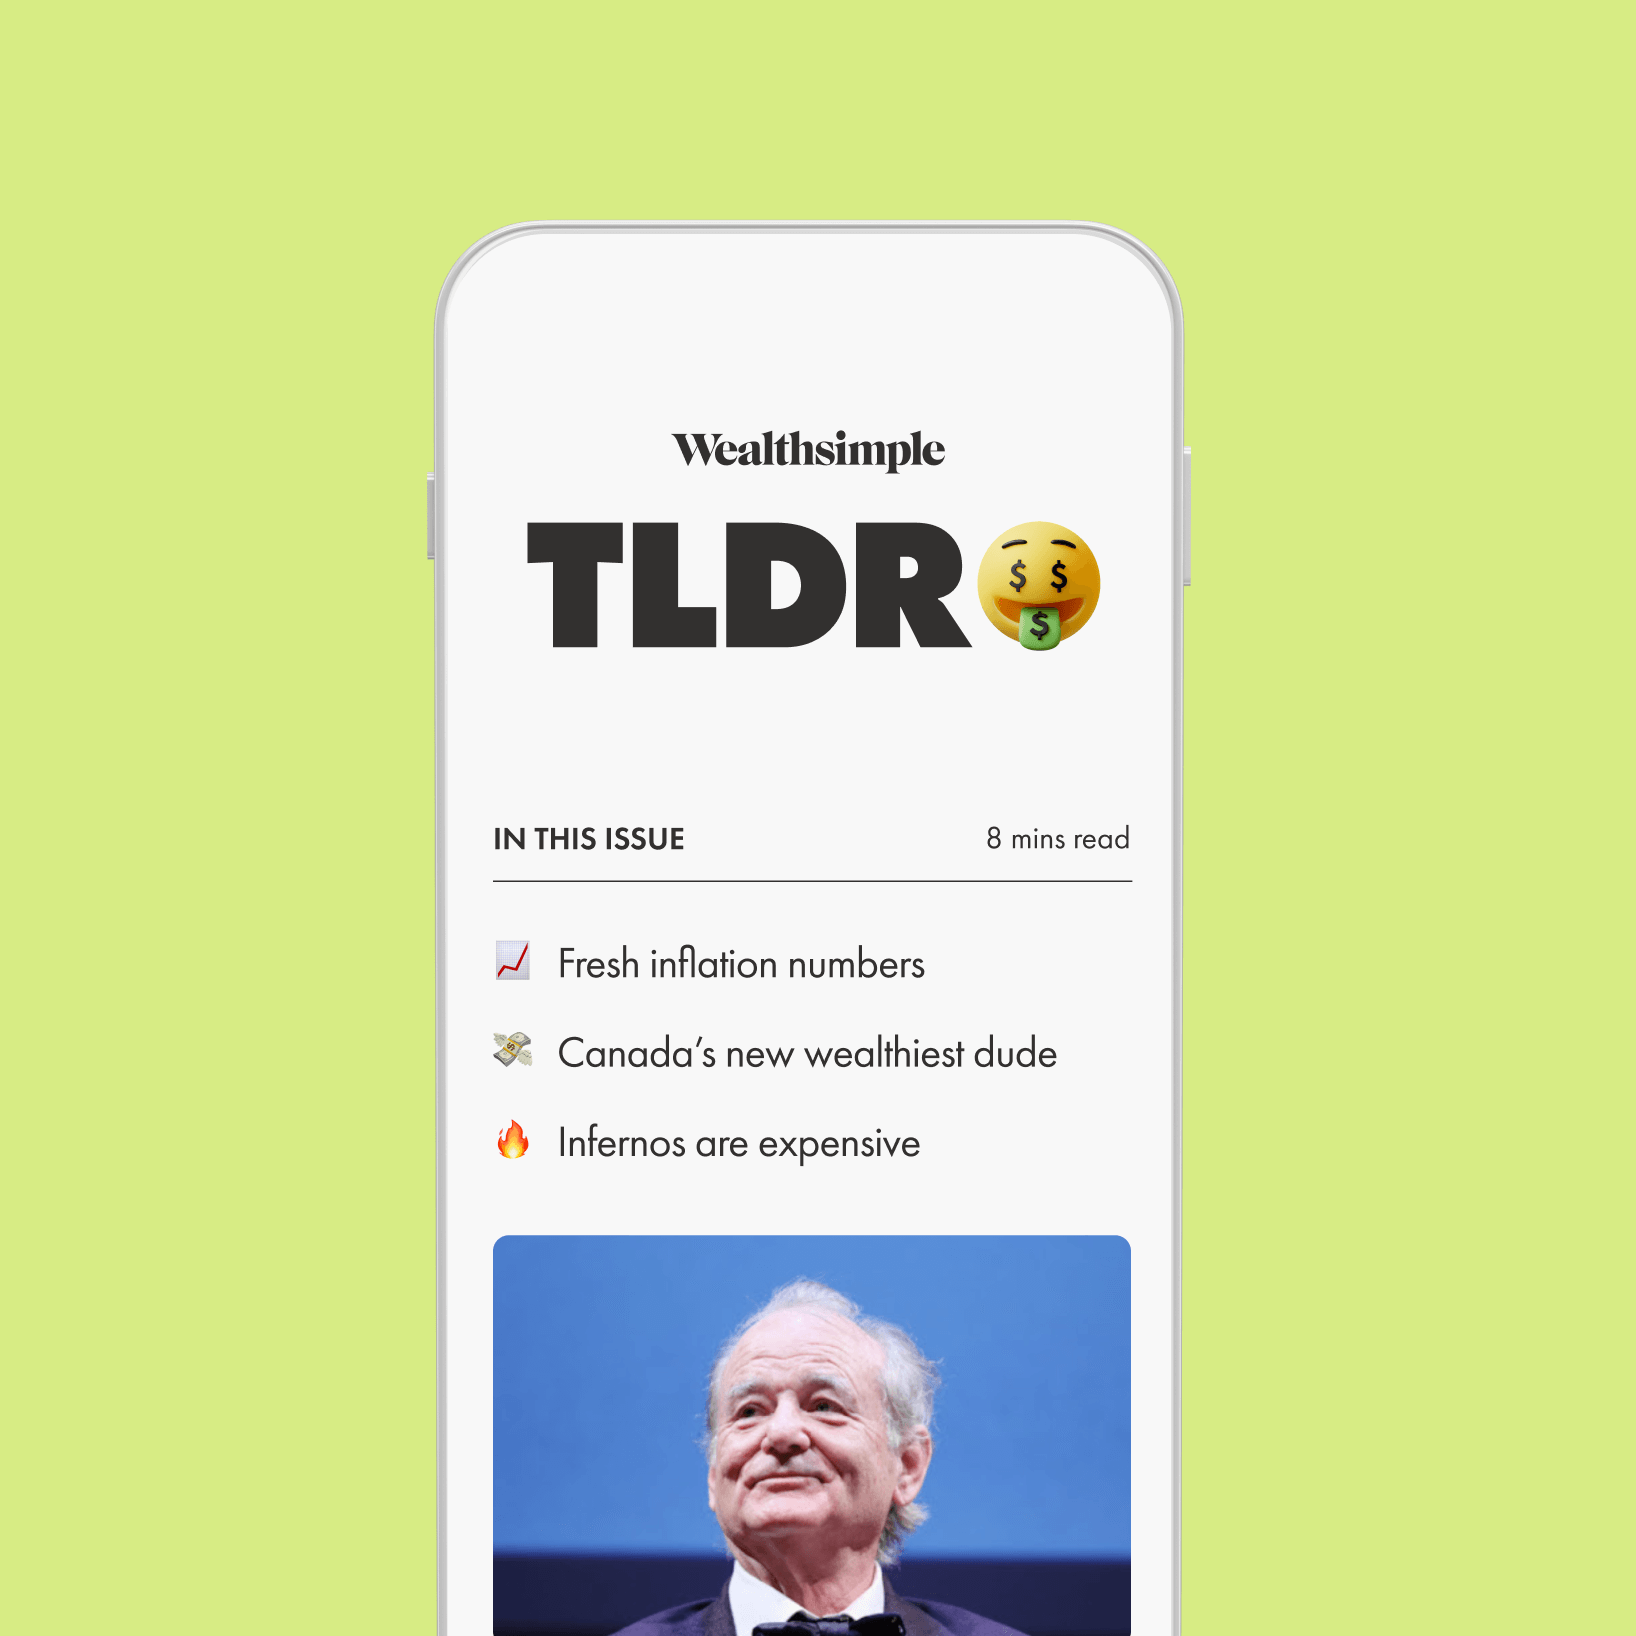 A preview of the TLDR newsletter, shown in a phone. On screen, we see a recap of three stories in the latest edition. They are: "Fresh inflation numbers", "Canada’s new wealthiest dude", and "Infernos are expensive". Below the three headlines is a picture of Bill Murray, before the image is cut off, indicating there’s more content below.